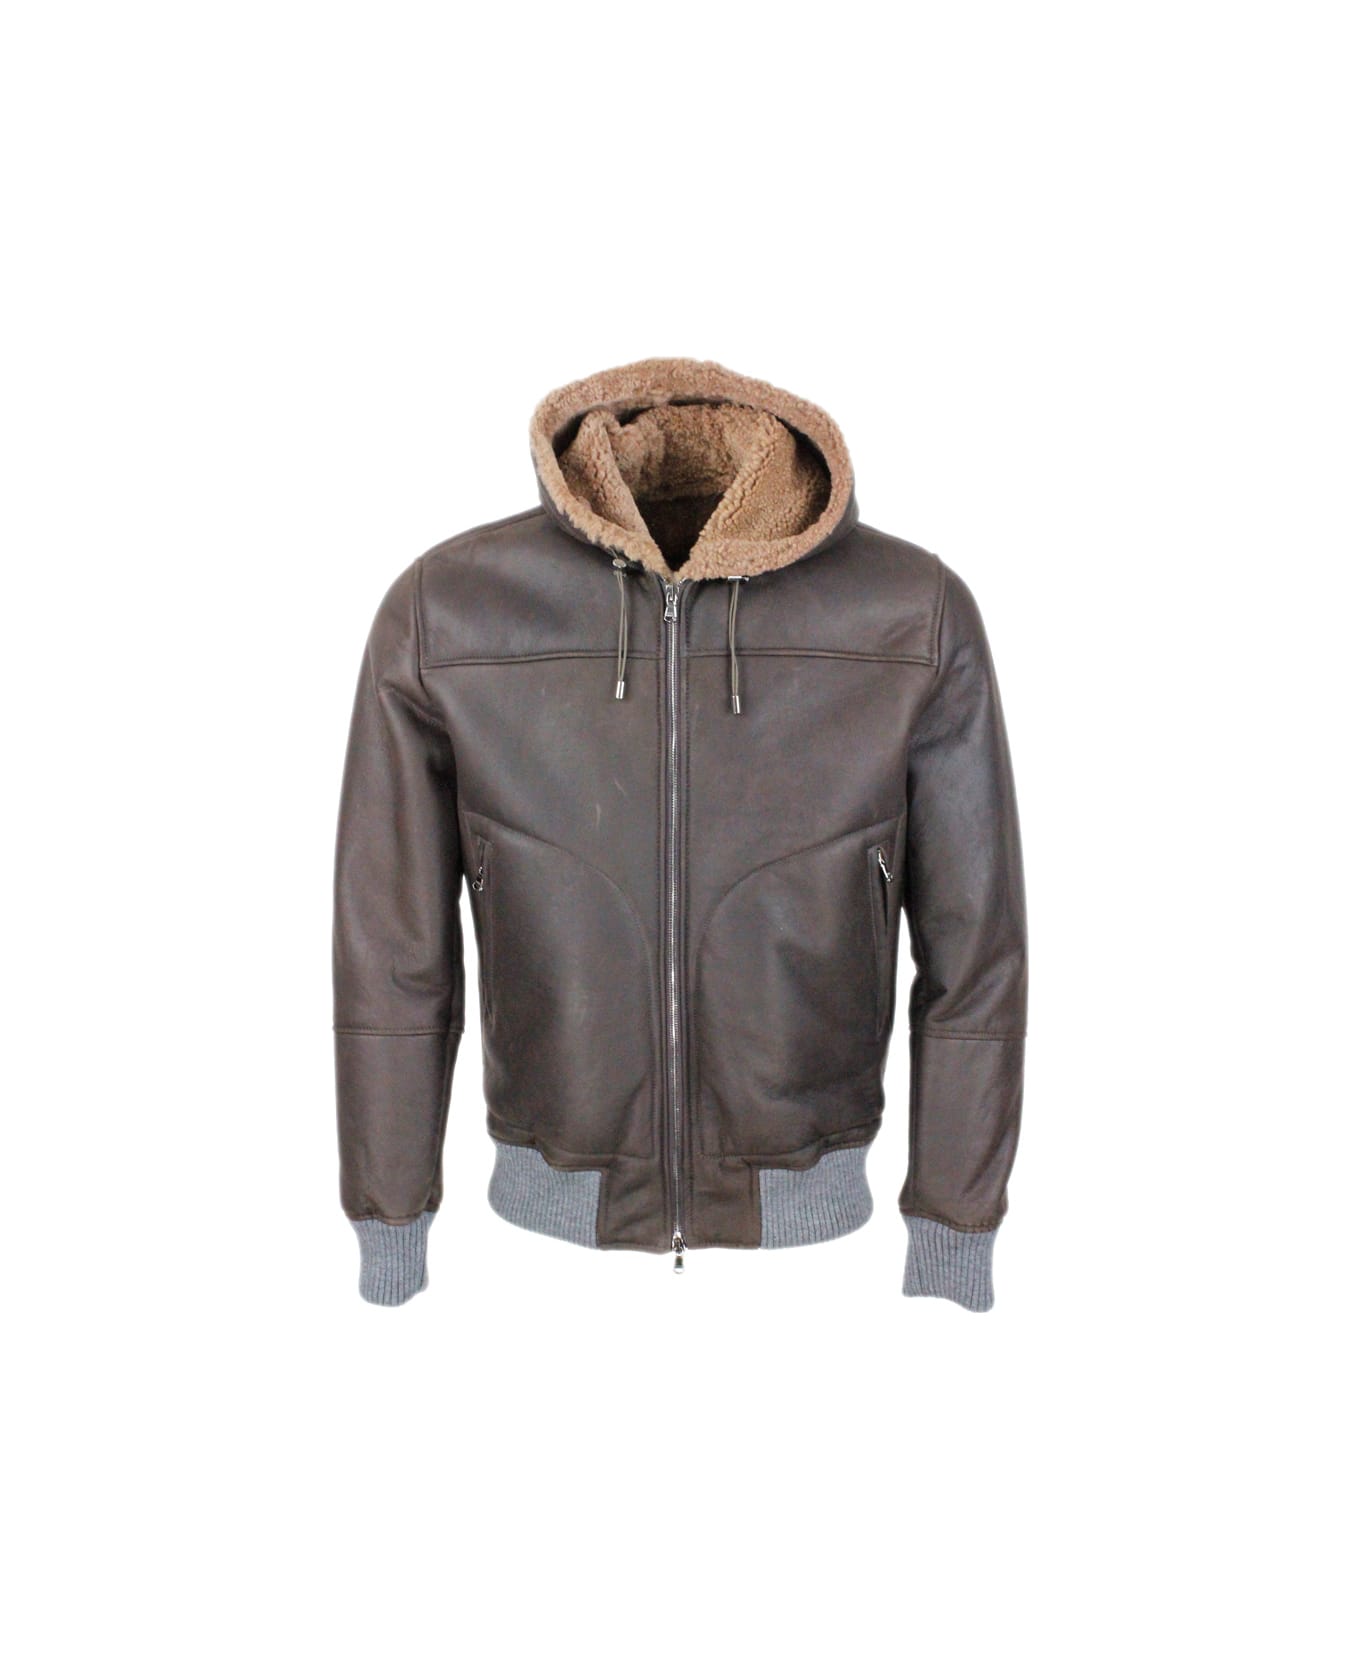 Barba Napoli Shearling Bomber Jacket With Hood With Drawstring And Trims In Stretch Knit And Zip Closure - Brown ジャケット